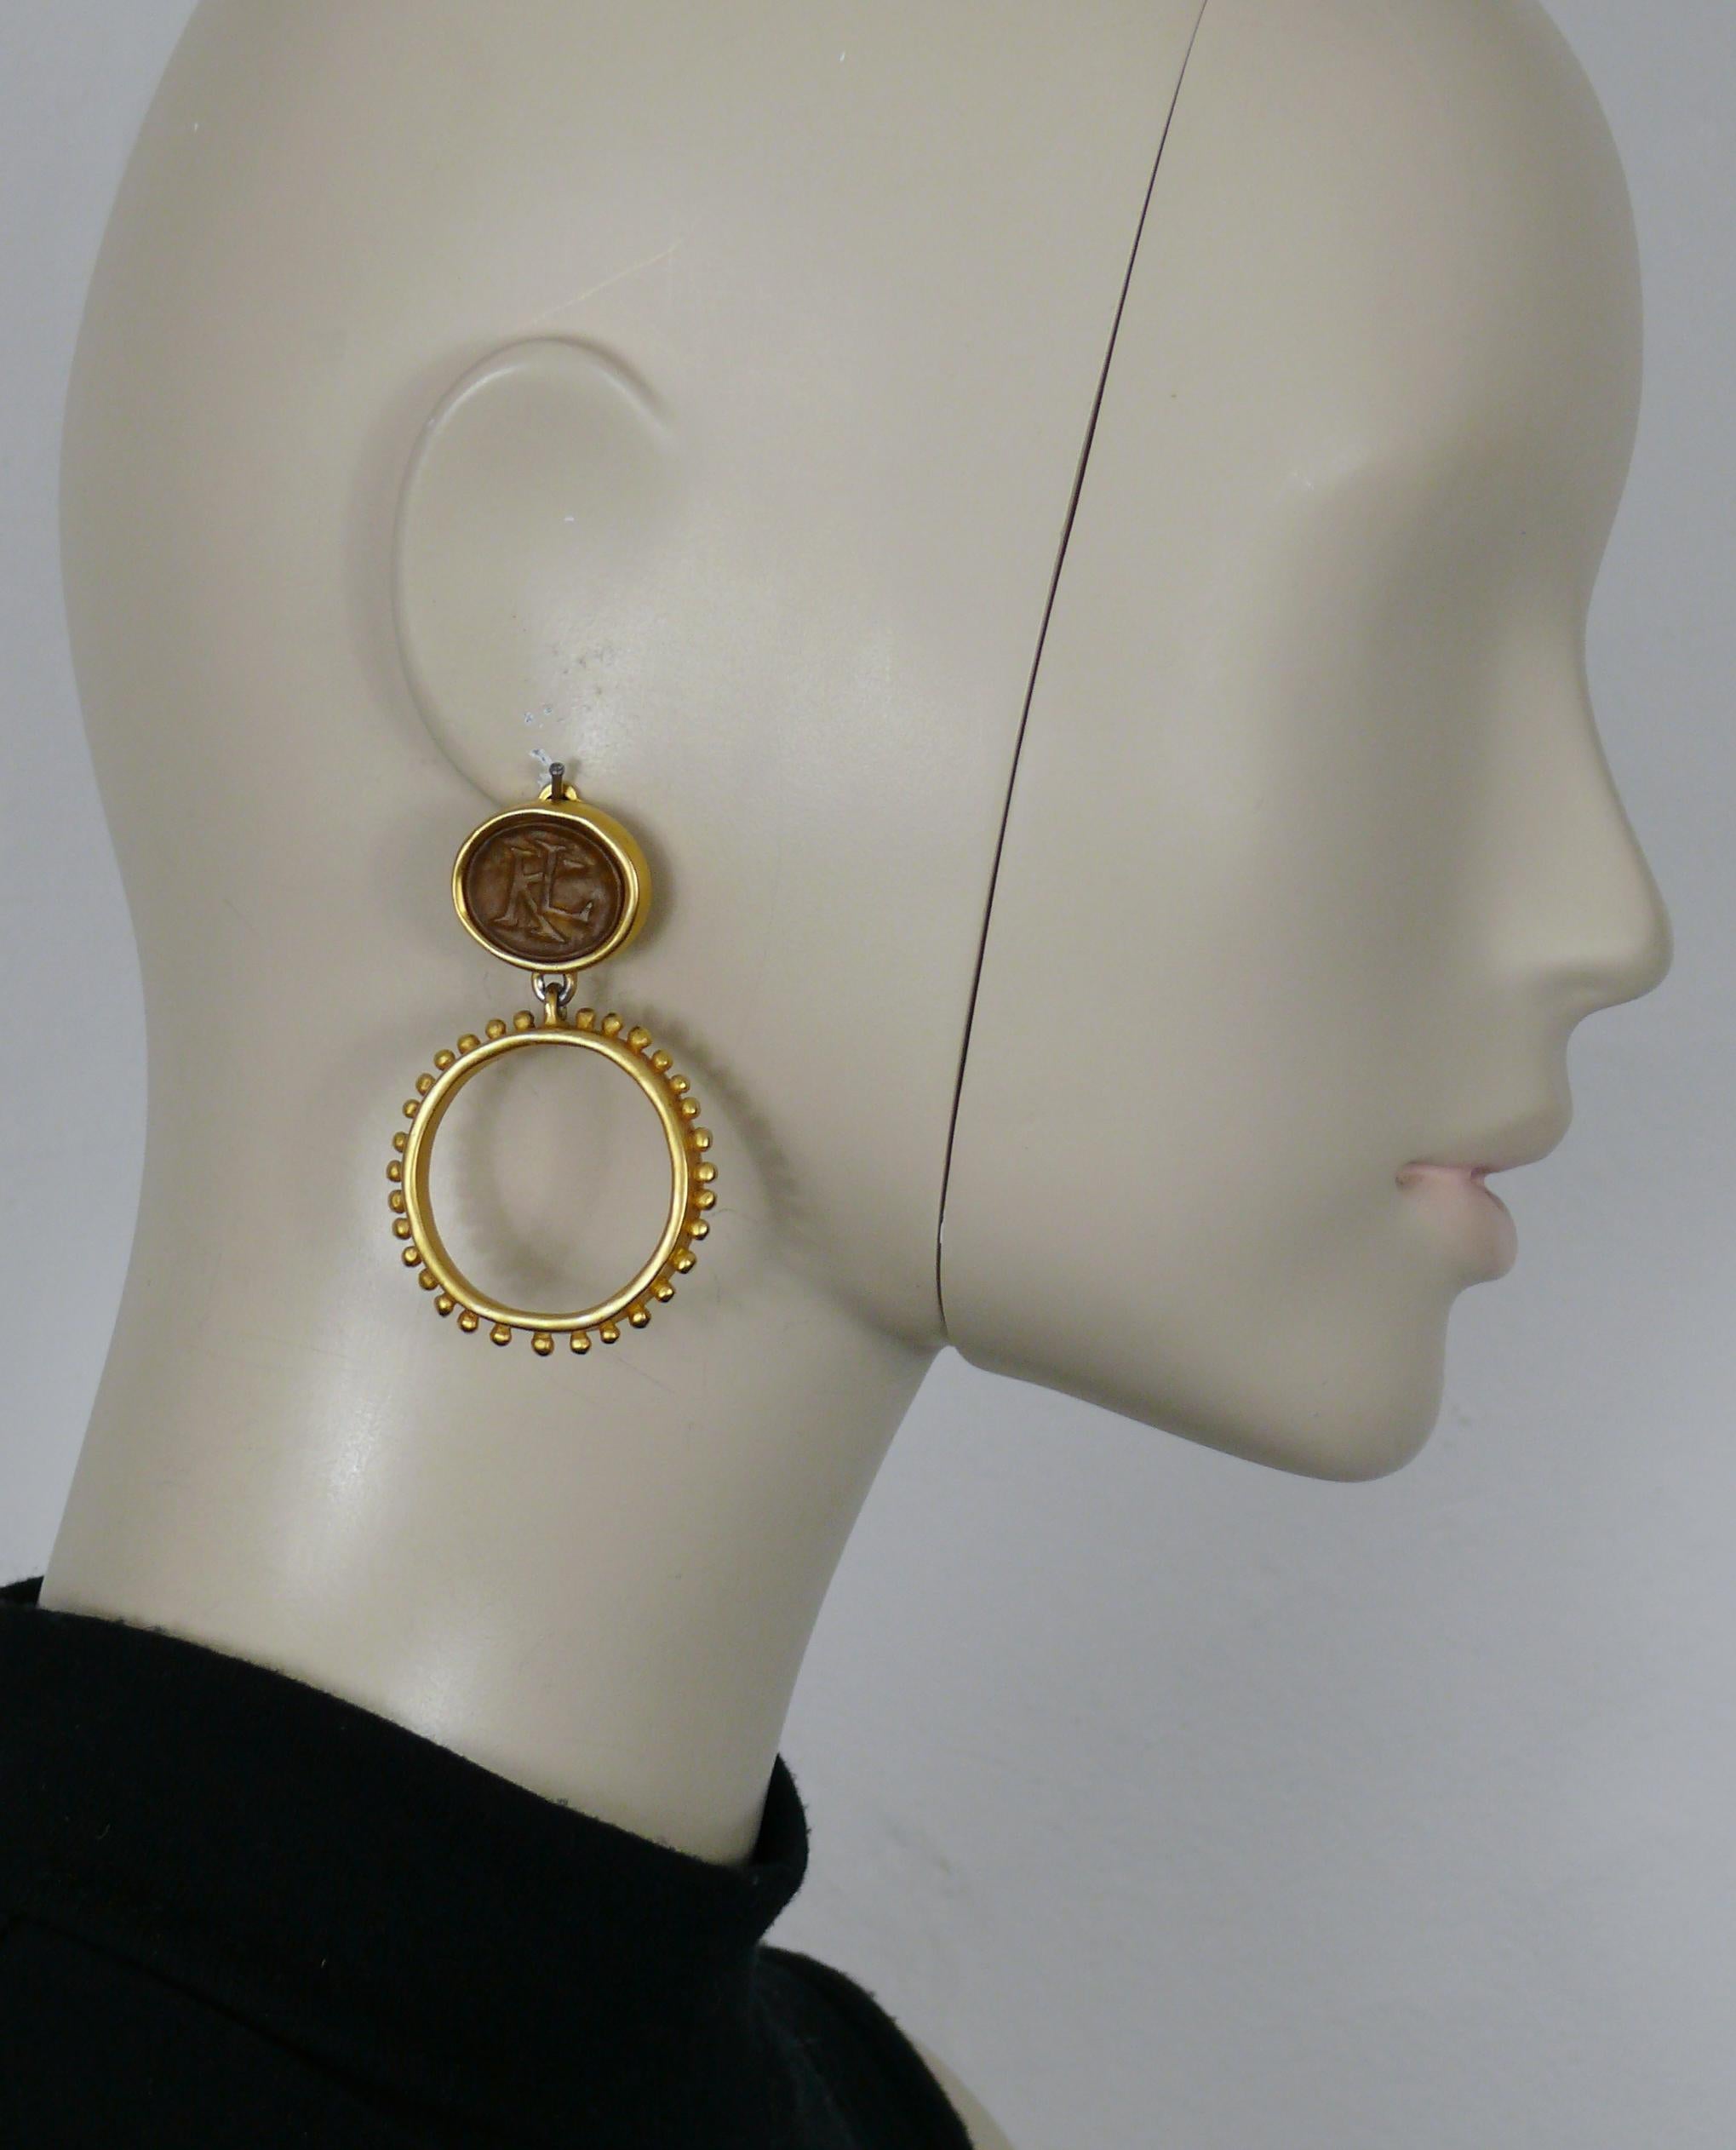 KARL LAGERFELD vintage gold tone hoop earrings (clip-on) featuring a brown resin cameo top with KL initials.

Embossed KL.

Indicative measurements : max. height approx. 6.2 cm (2.44 inches) / diameter of the hoop approx. 3.6 cm (1.42